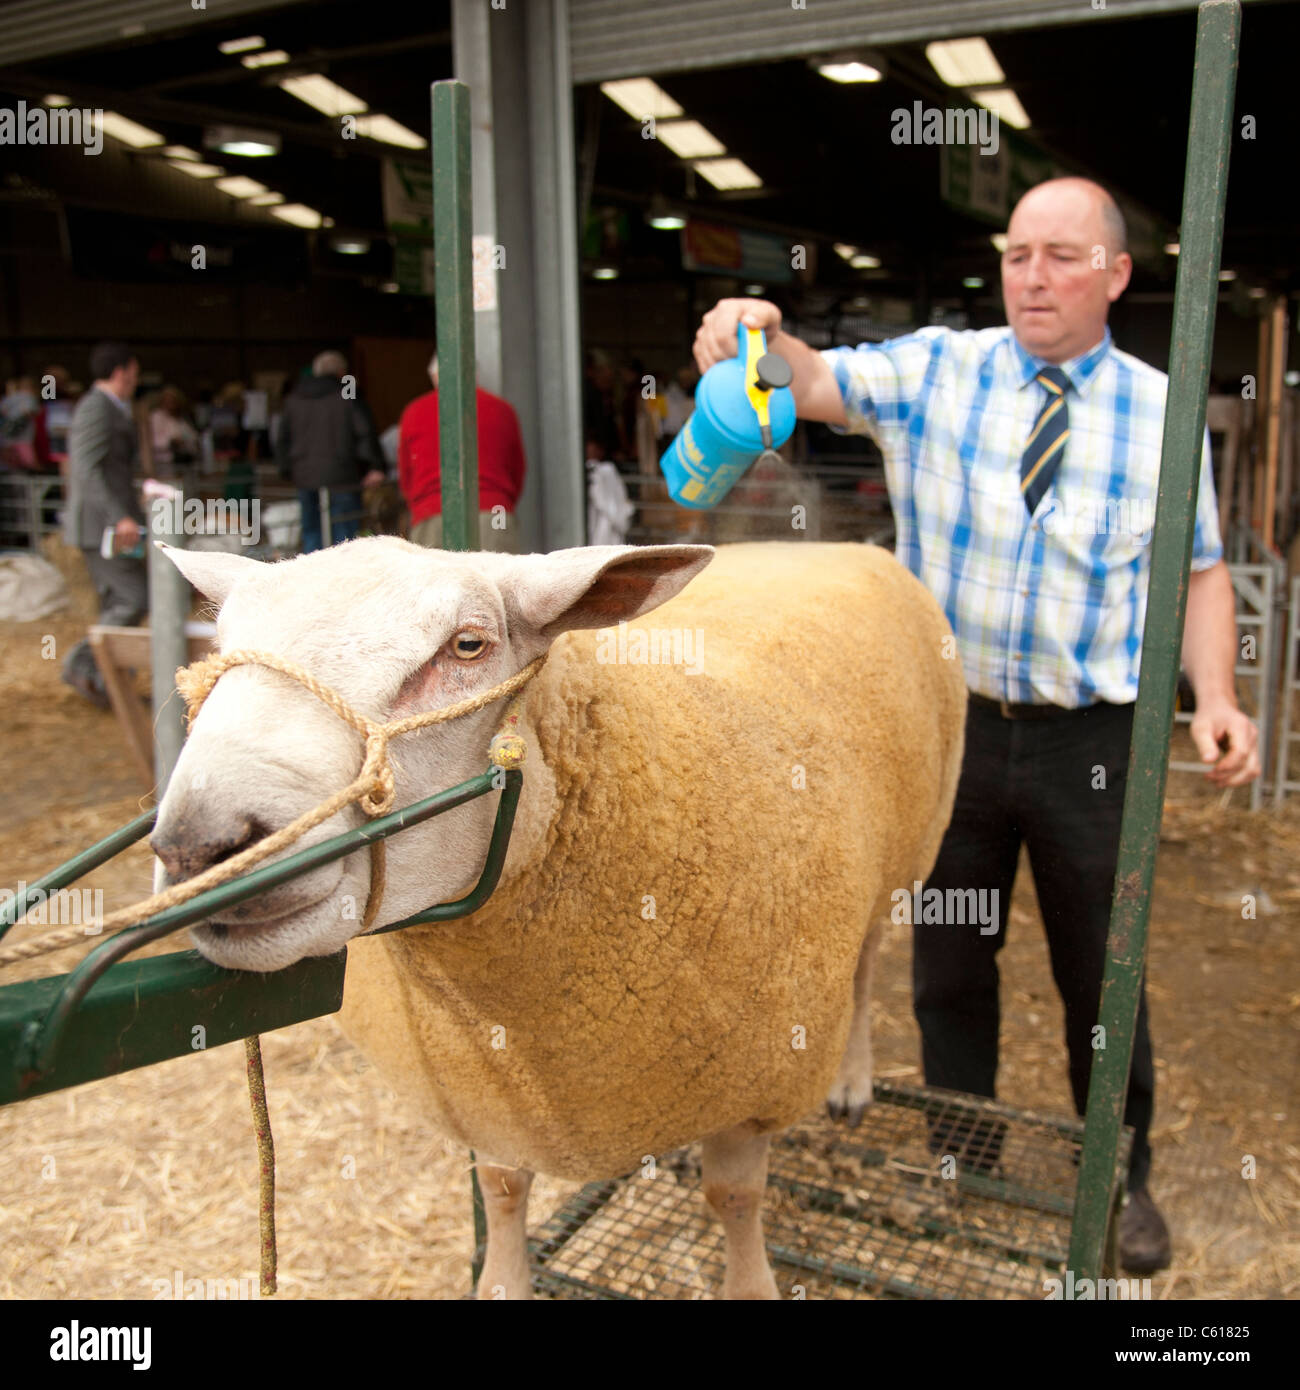 A man Preparing a sheep for competition at the Royal Welsh Agricultural Show, Builth Wells, Wales, 2011 Stock Photo